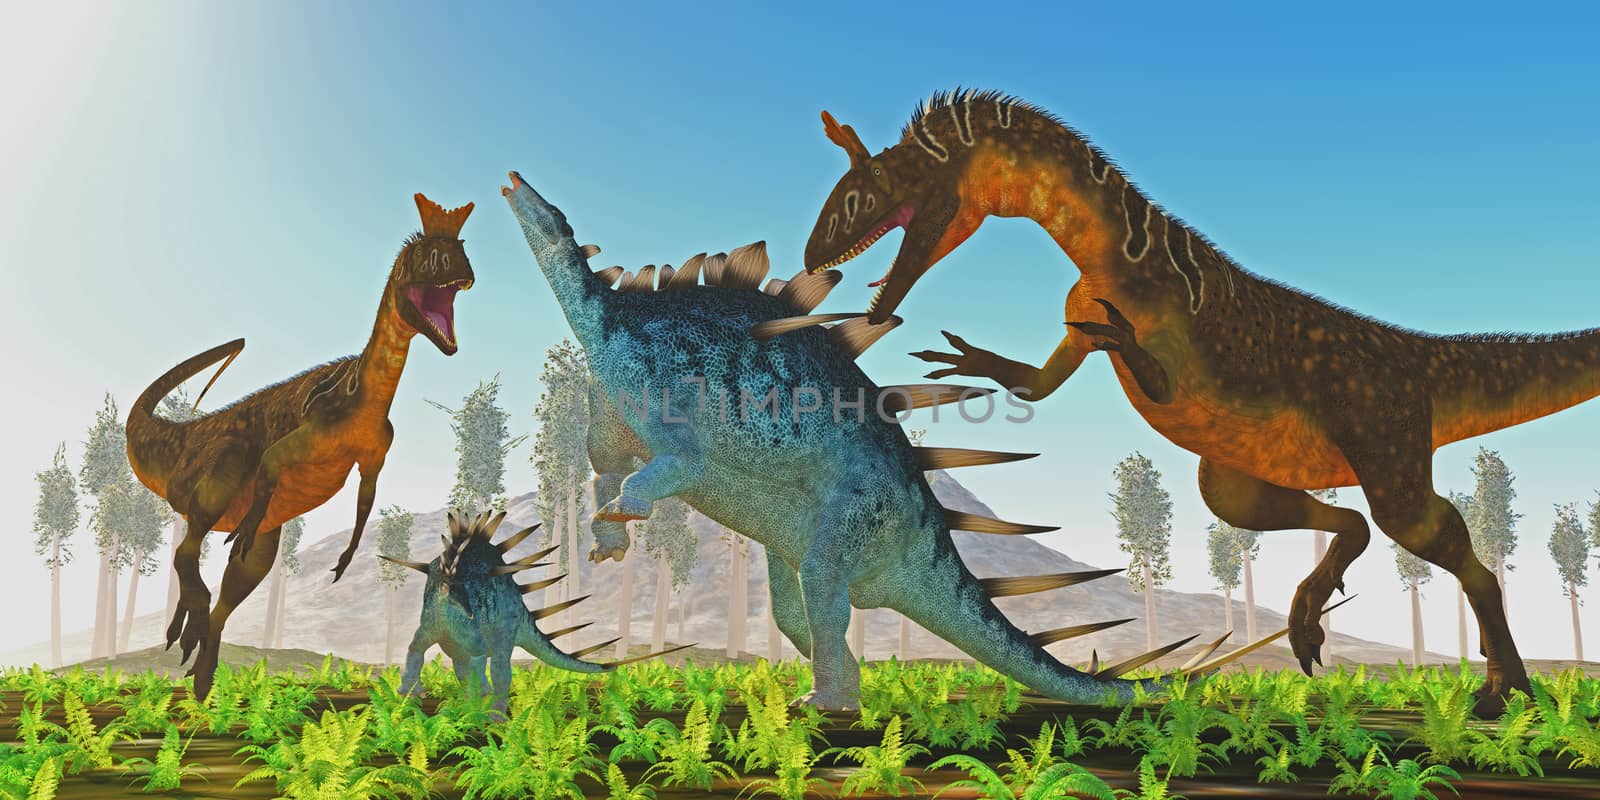 A Kentrosaurus female rears up to defend her offspring from two carnivorous Cryolophosaurus dinosaurs.